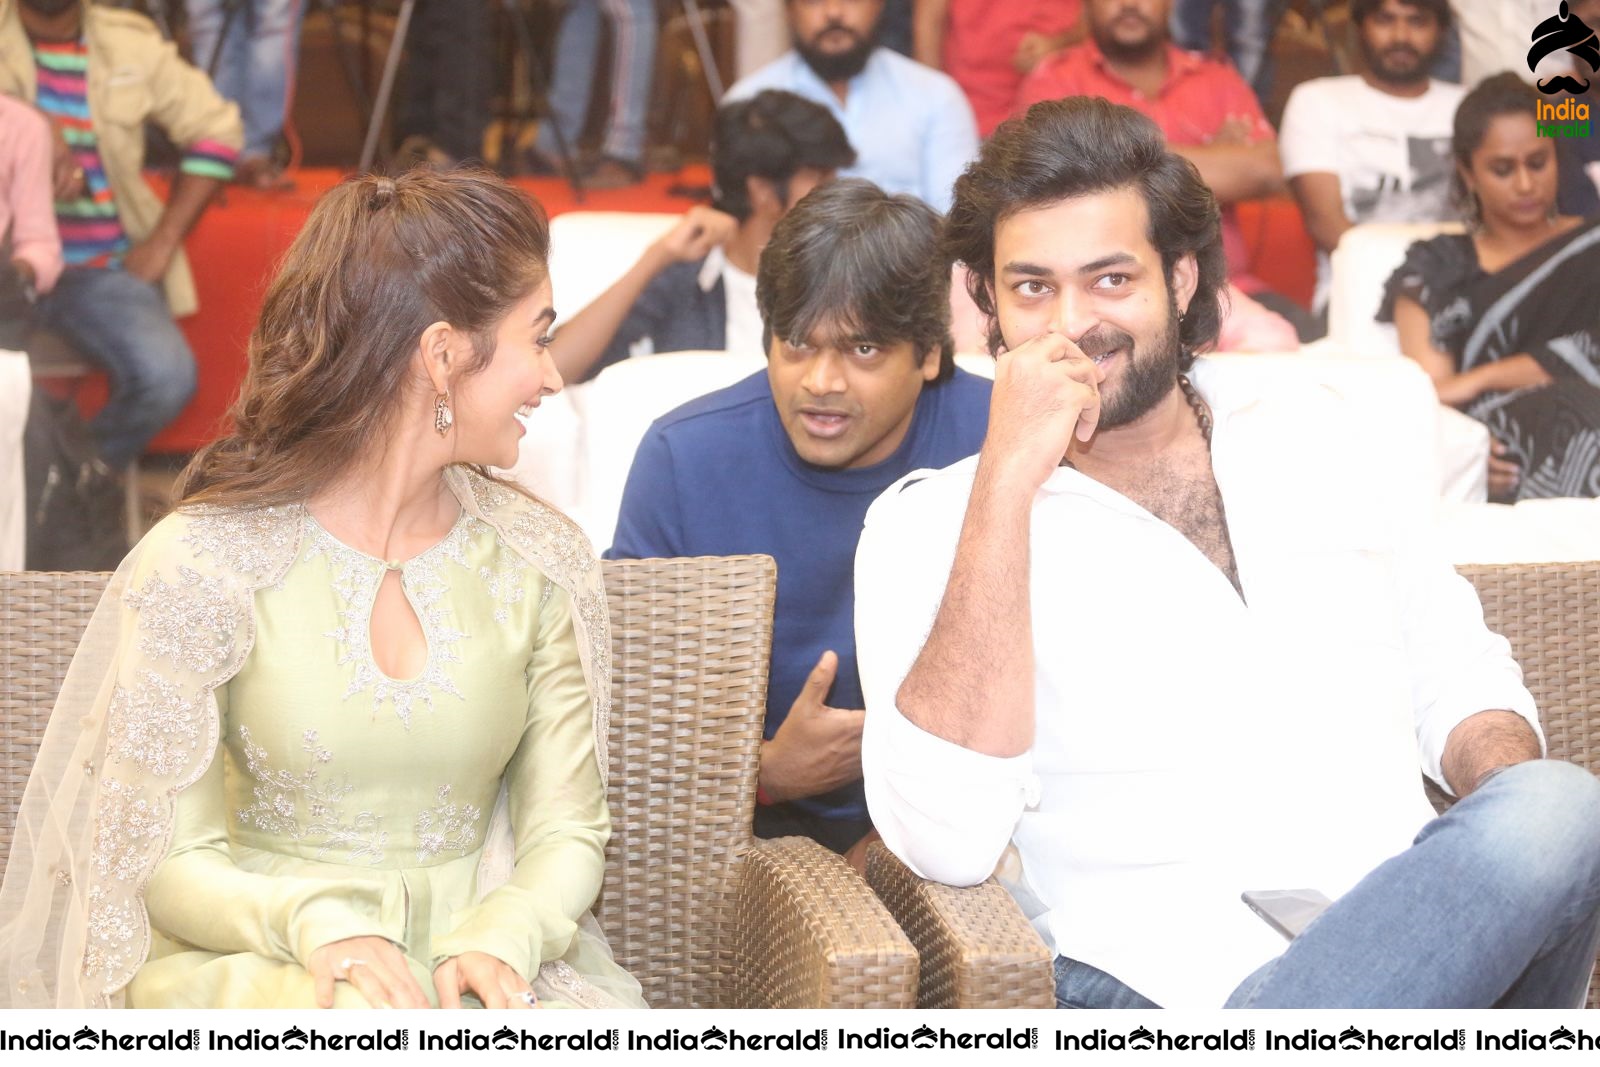 Actor Varun Tej caught while interacting with Various celebs